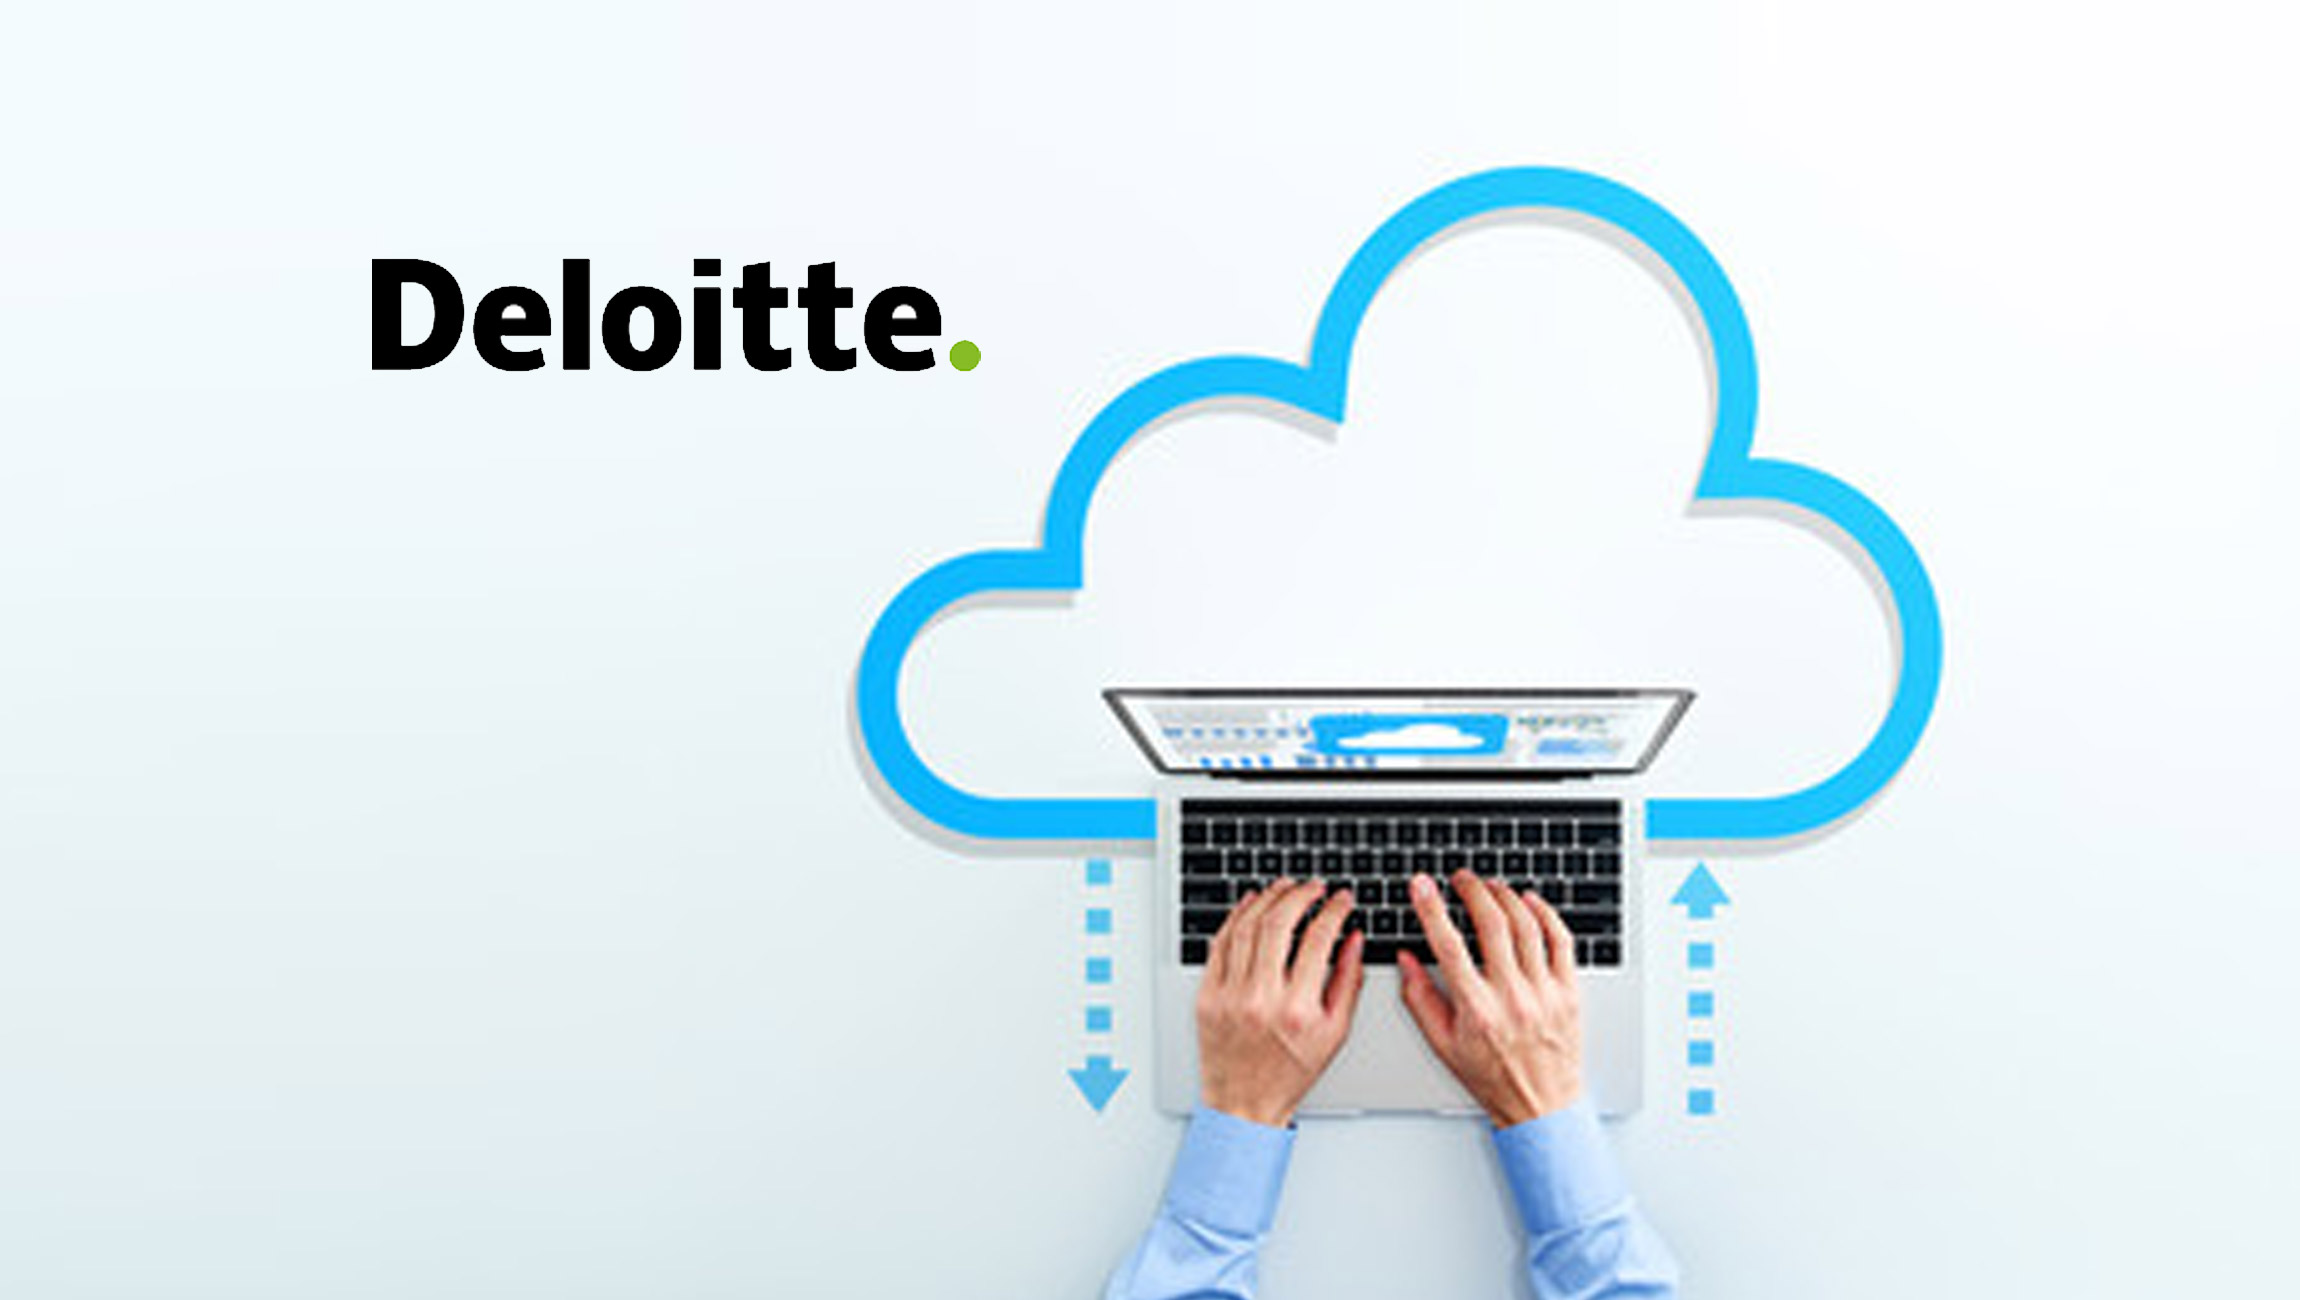 Deloitte Announces Large-scale Expansion of its Global Google Cloud Practice and Alliance